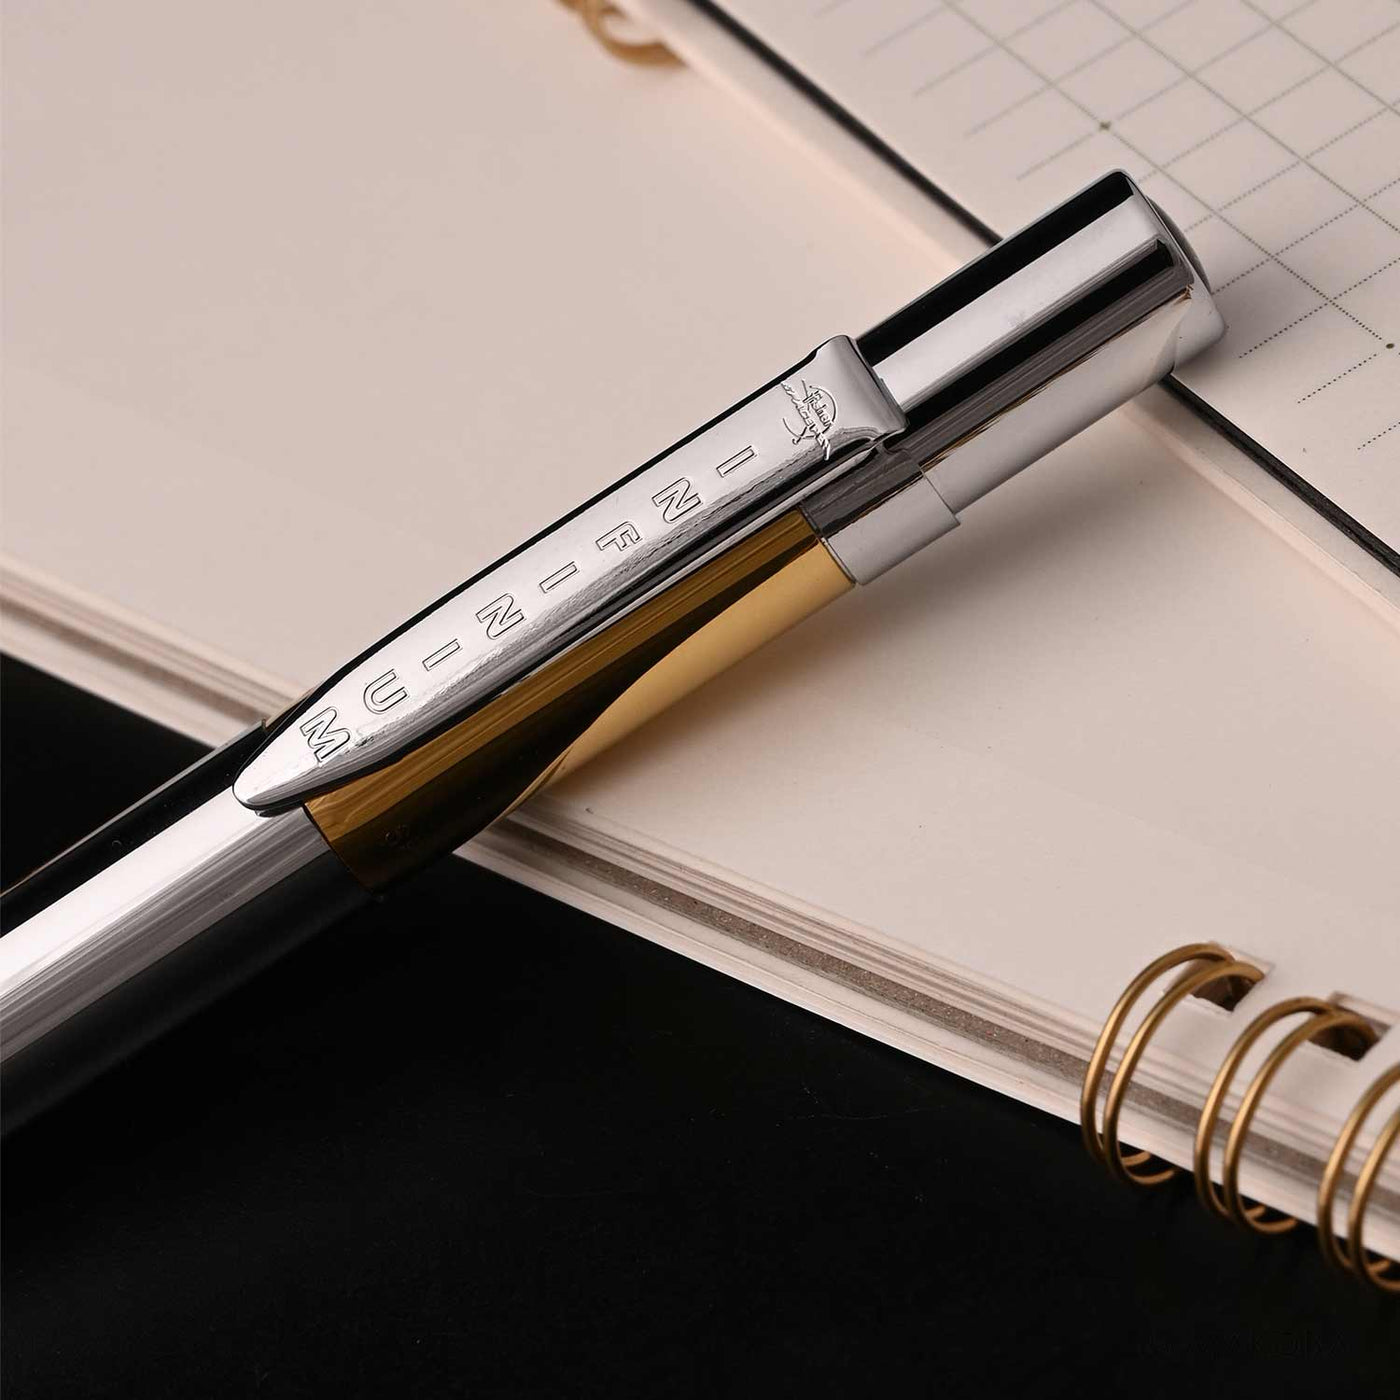 Fisher Space Infinium Ball Pen, Gold Titanium Chrome ( Blue Ink) - Guaranteed To Write For A Lifetime